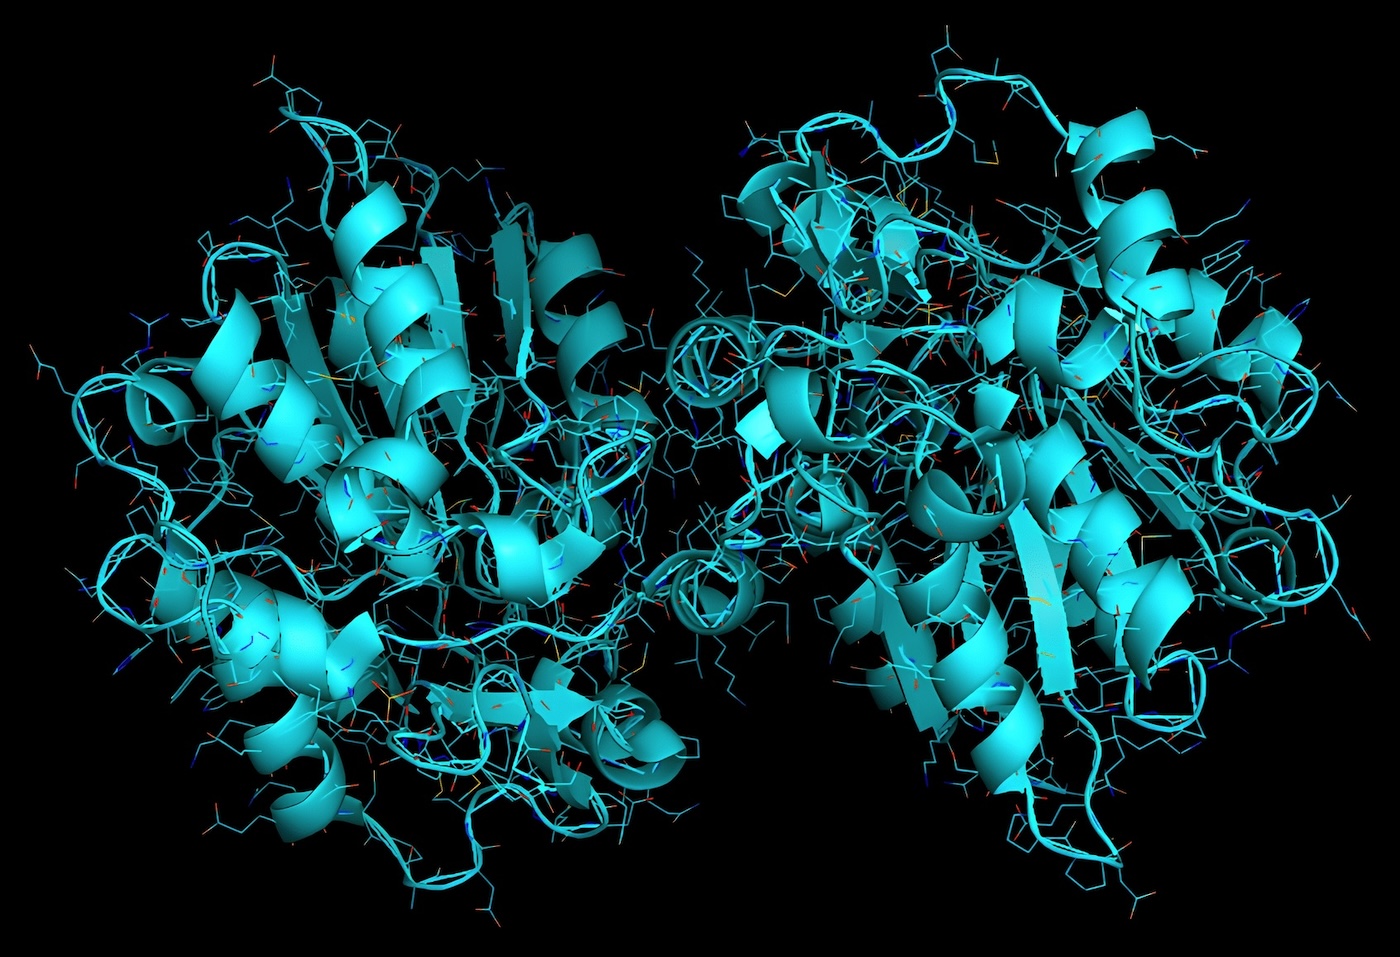 This is a depiction of the Enzyme Polyneuridine-Aldehyde Esterase.